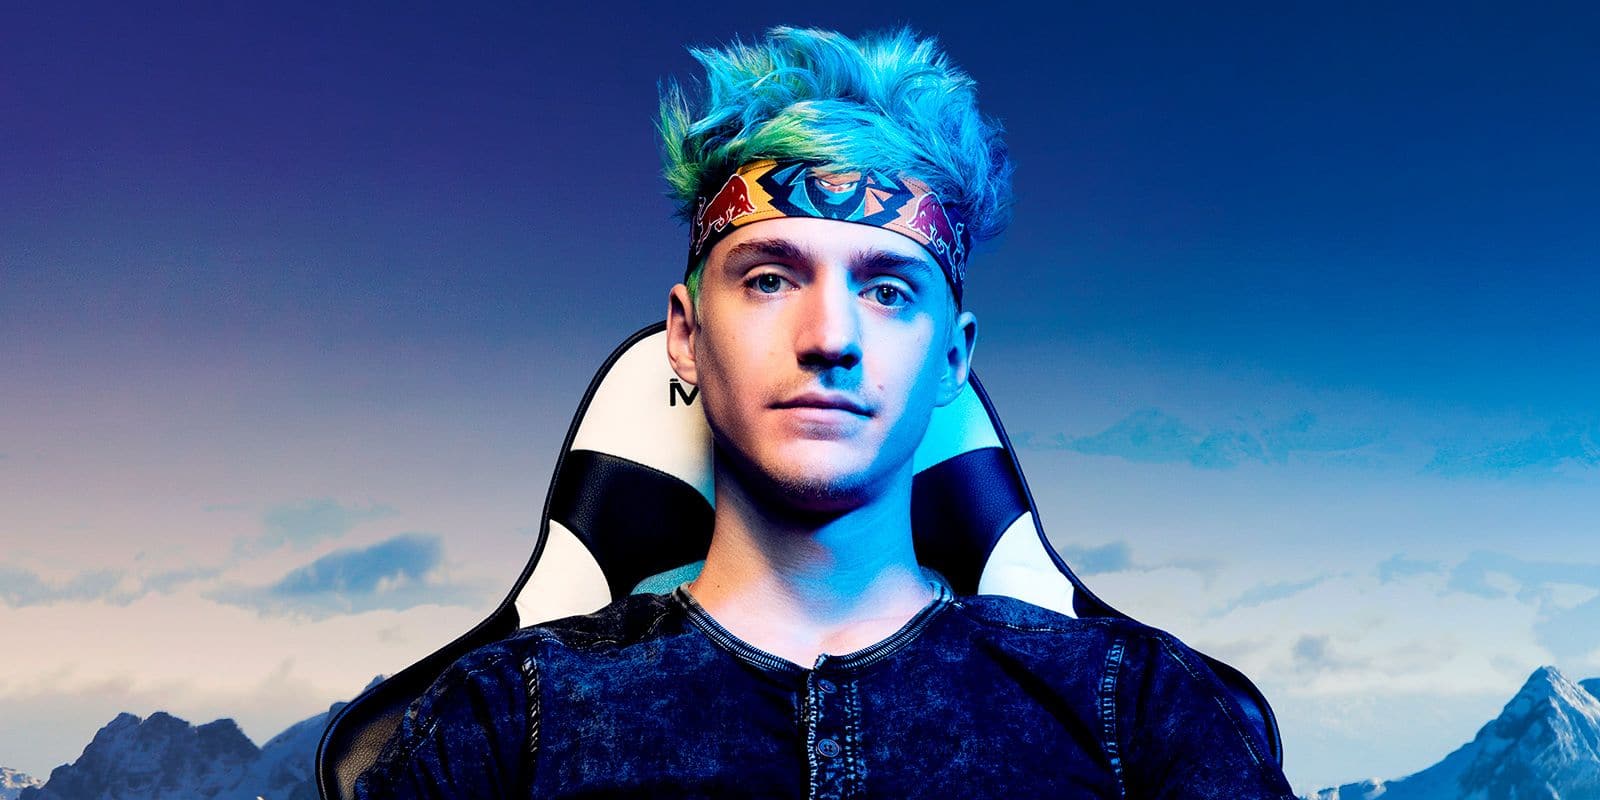 ninja reportedly got paid 1 million from ea to stream apex legends